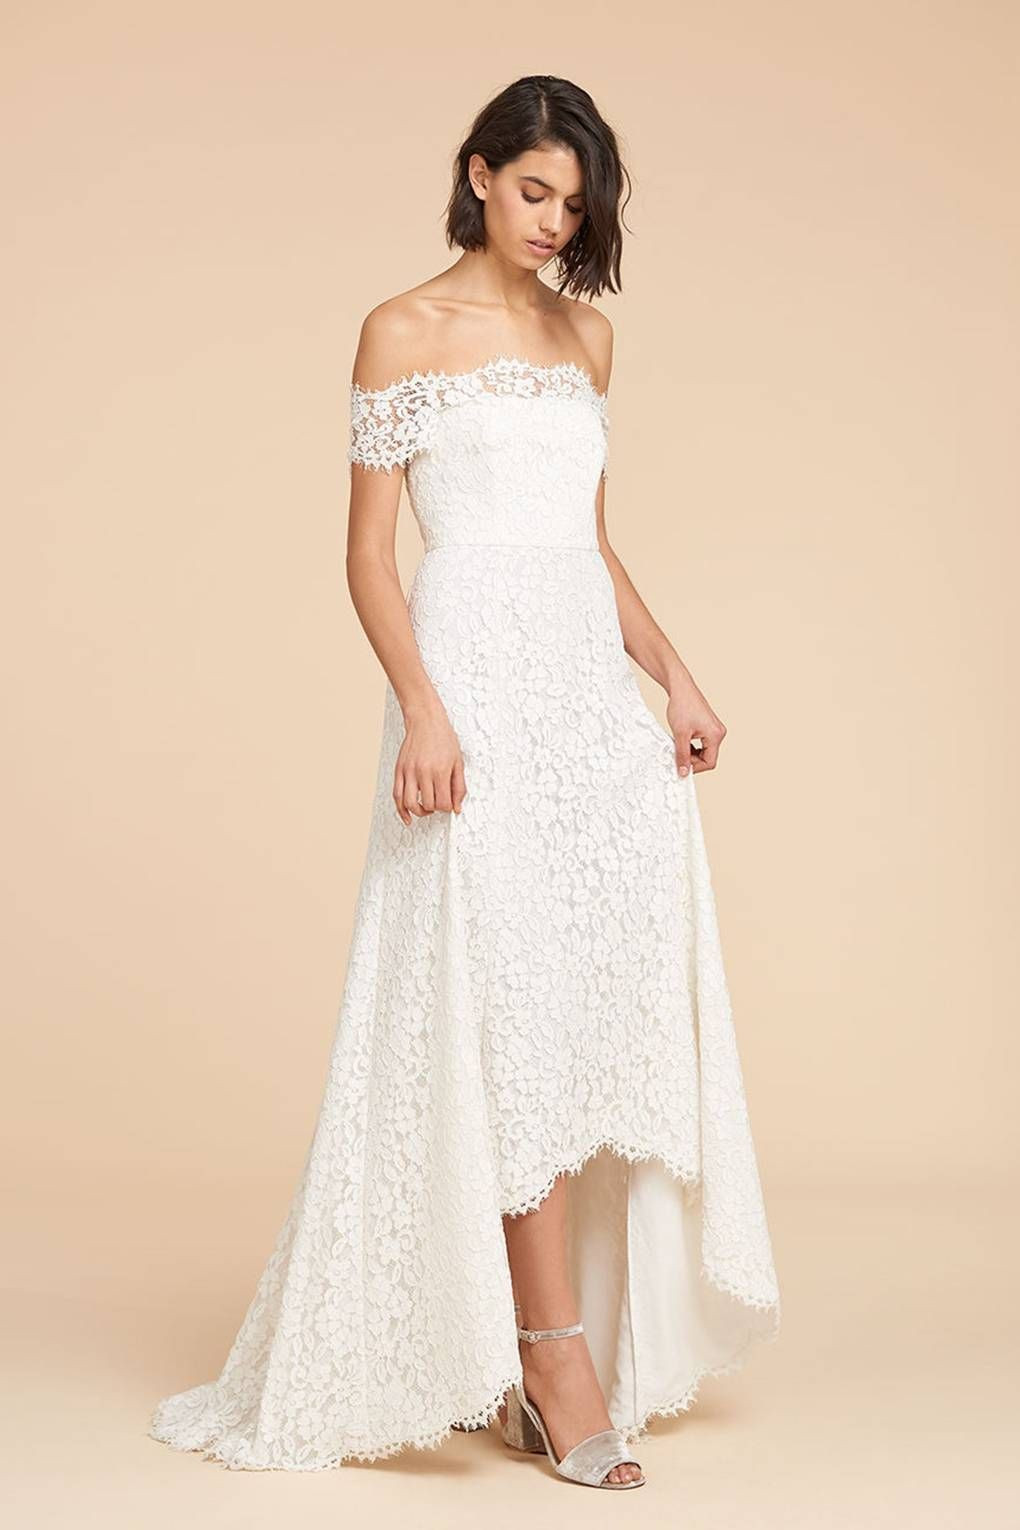 Wedding Gowns Under $100
 30 Affordable Bridesmaid Dresses Under $100